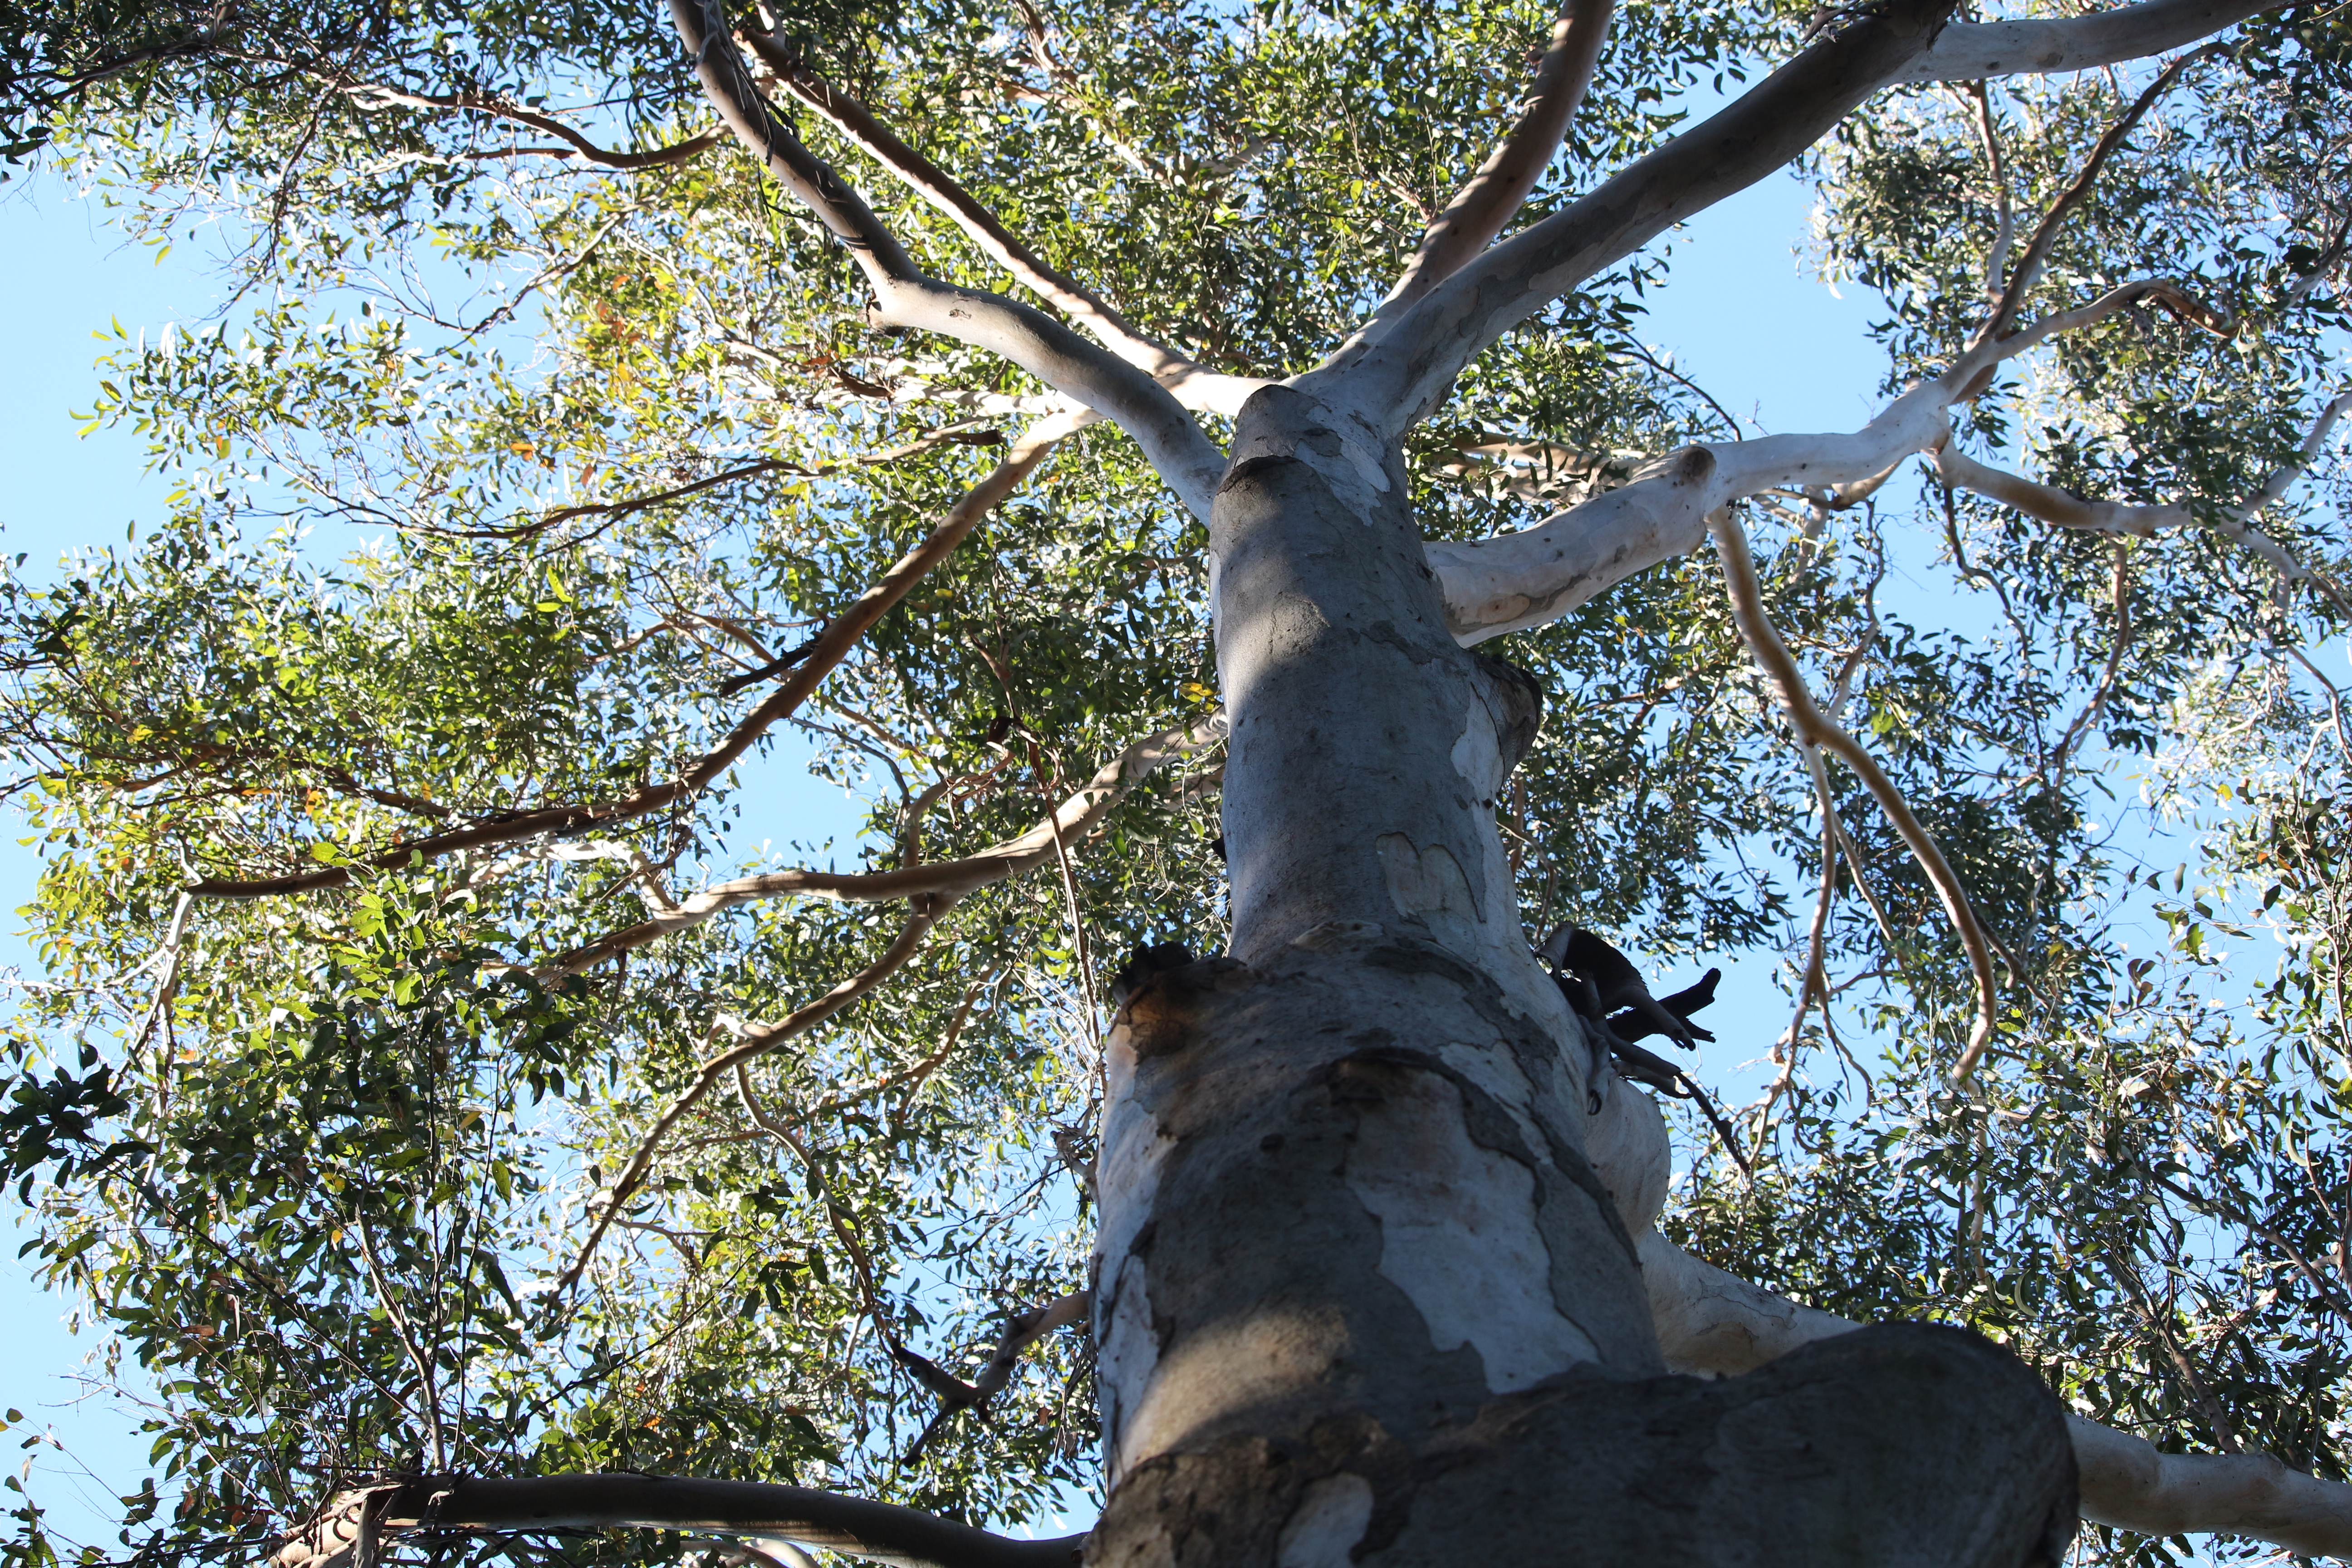 Looking close up at the trunk of a red gum tree, showing the bark peeling off and how tall the tree is.